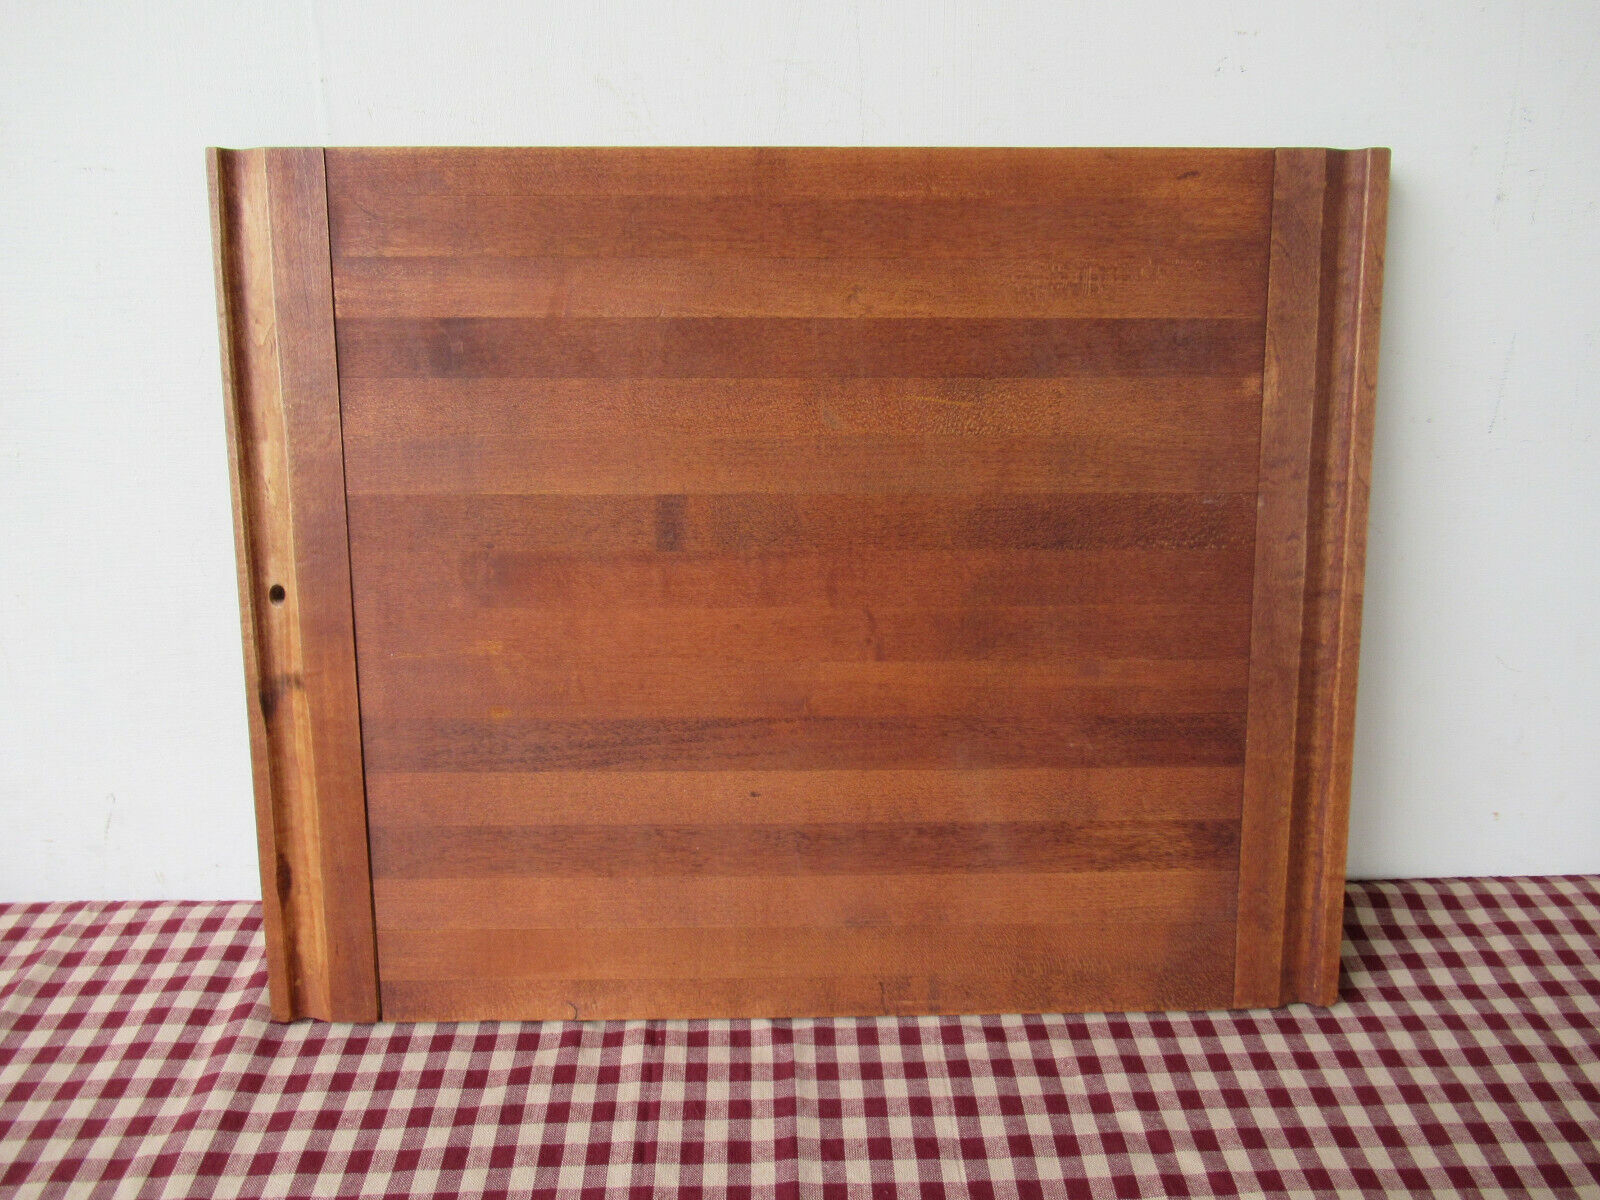 Vintage Dough Bread Carving Board, Grooved Hardwood, 17"x13", Primitive Country